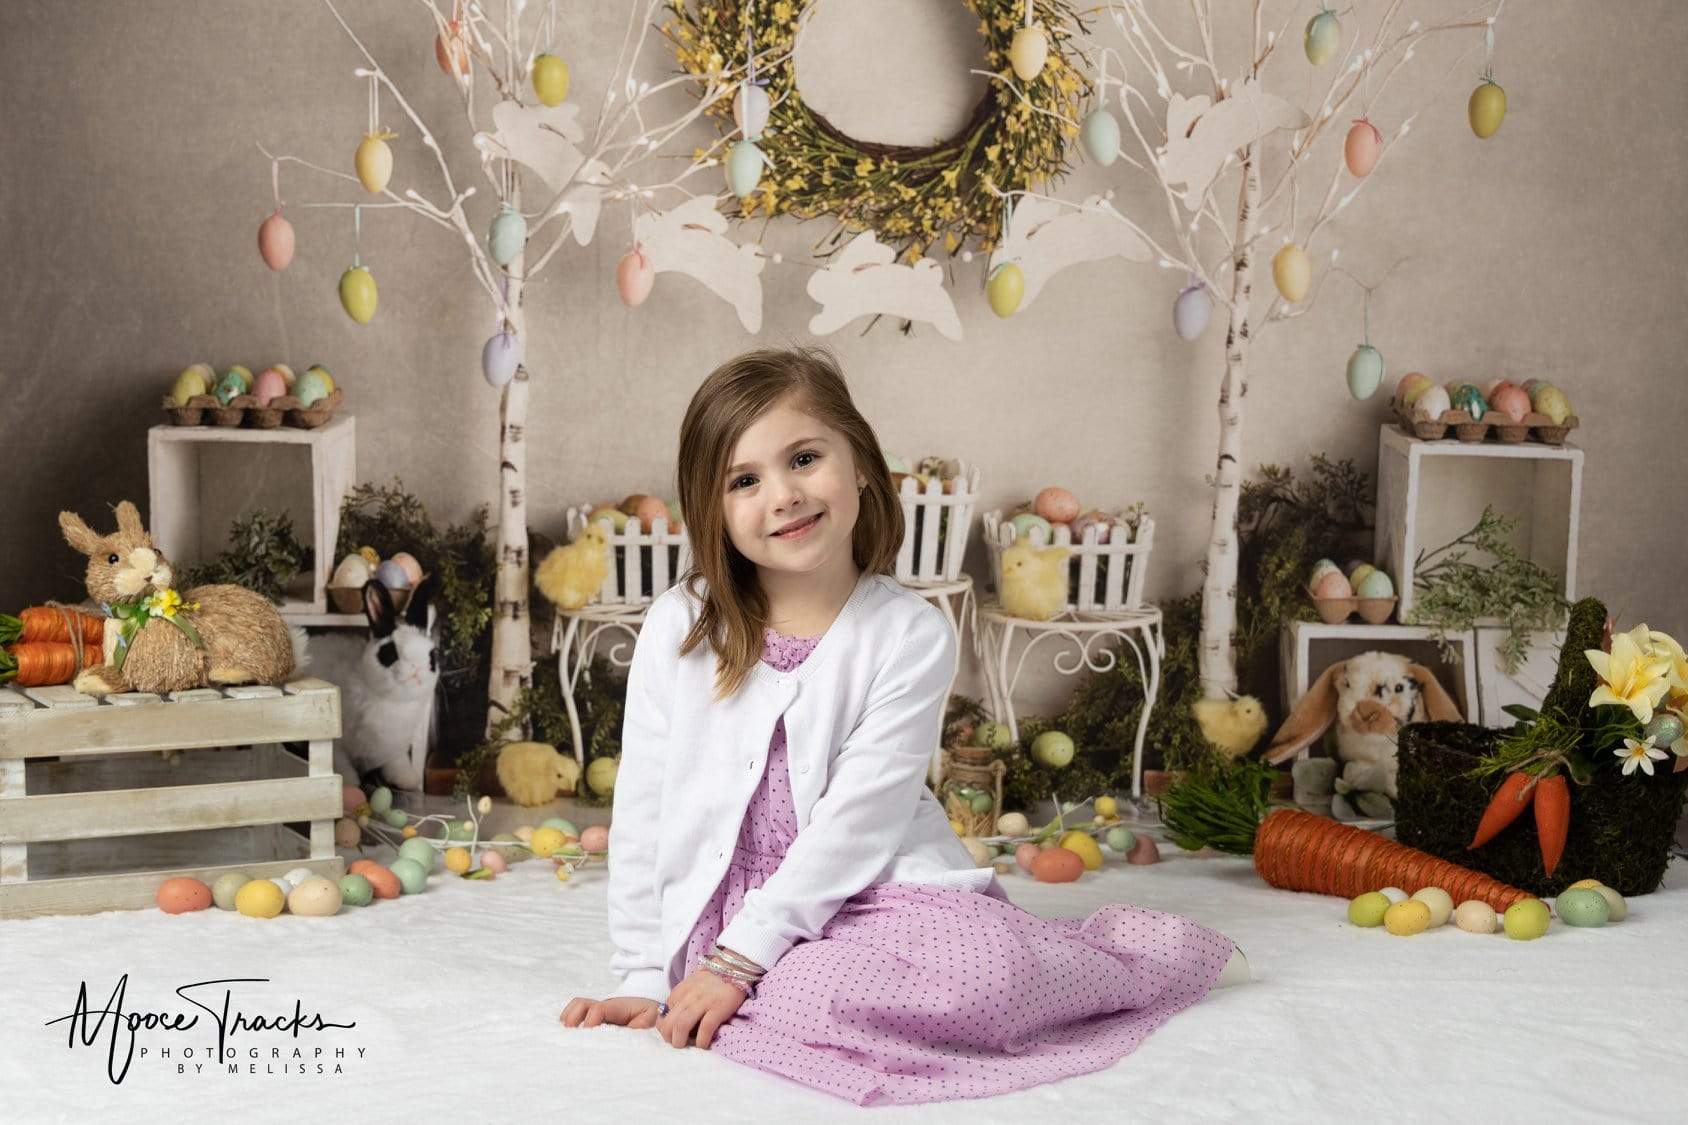 Katebackdrop：Kate Easter Egg Trees and Bunnies Backdrop Designed By Mandy Ringe Photography